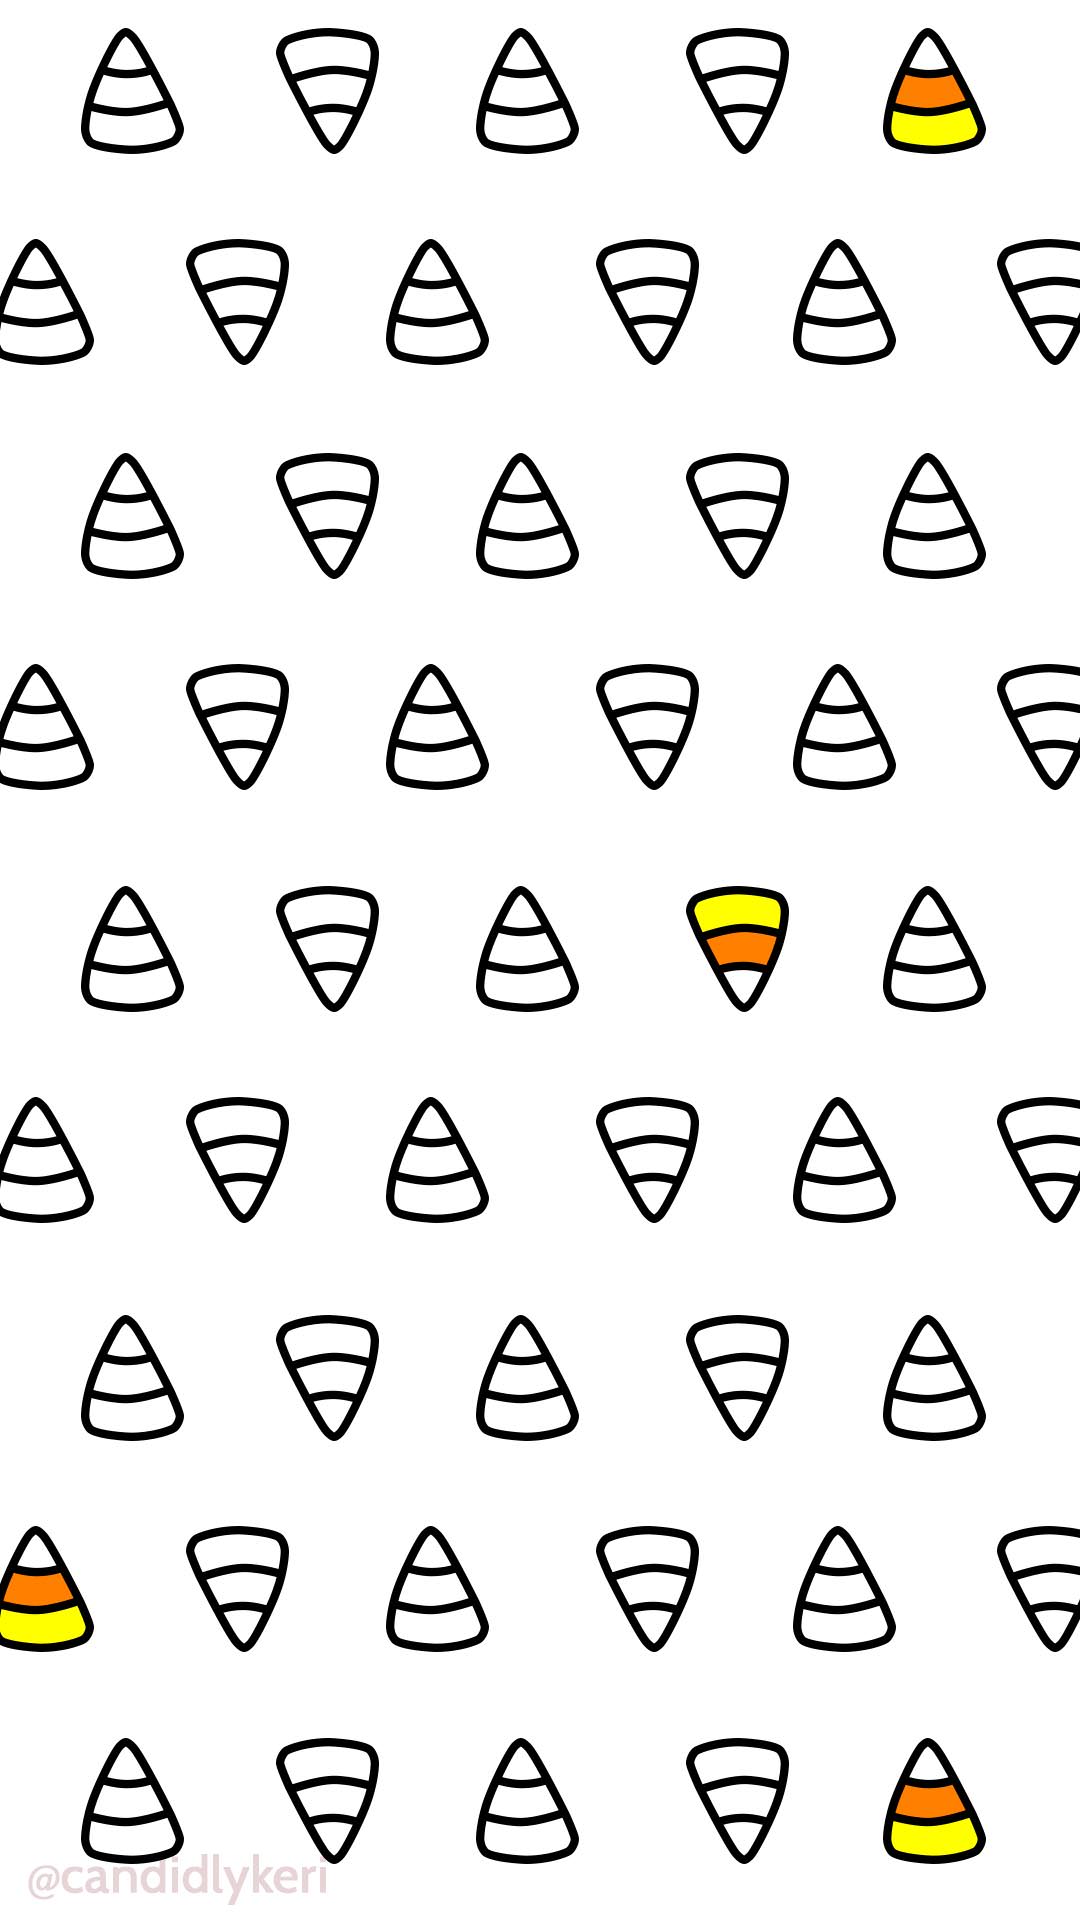 Cute Halloween Candy Corn October You Can Download For Free On The